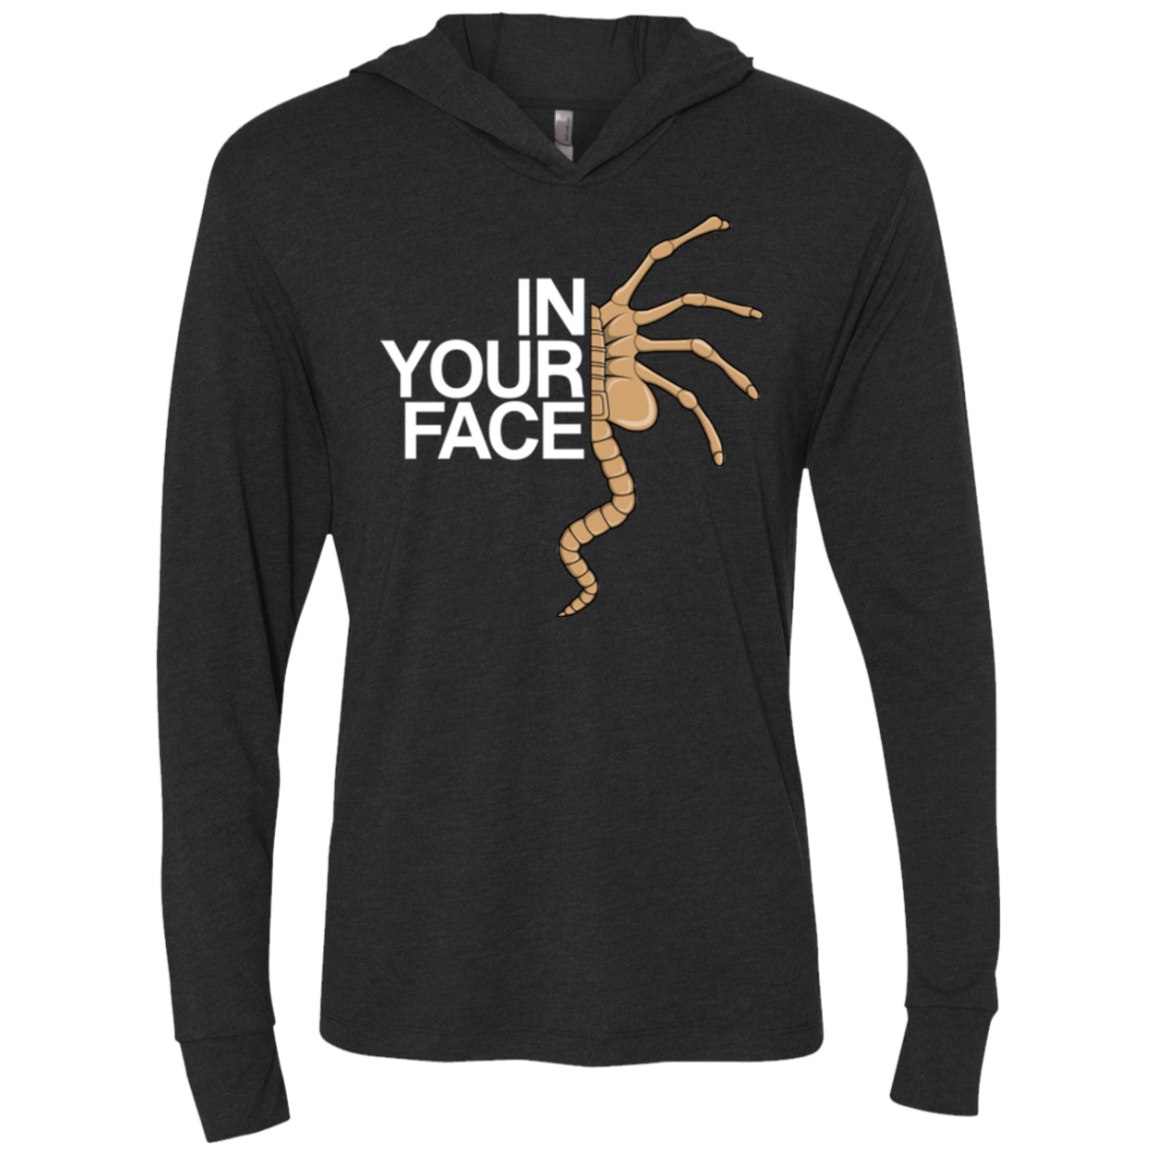 IN YOUR FACE Triblend Long Sleeve Hoodie Tee